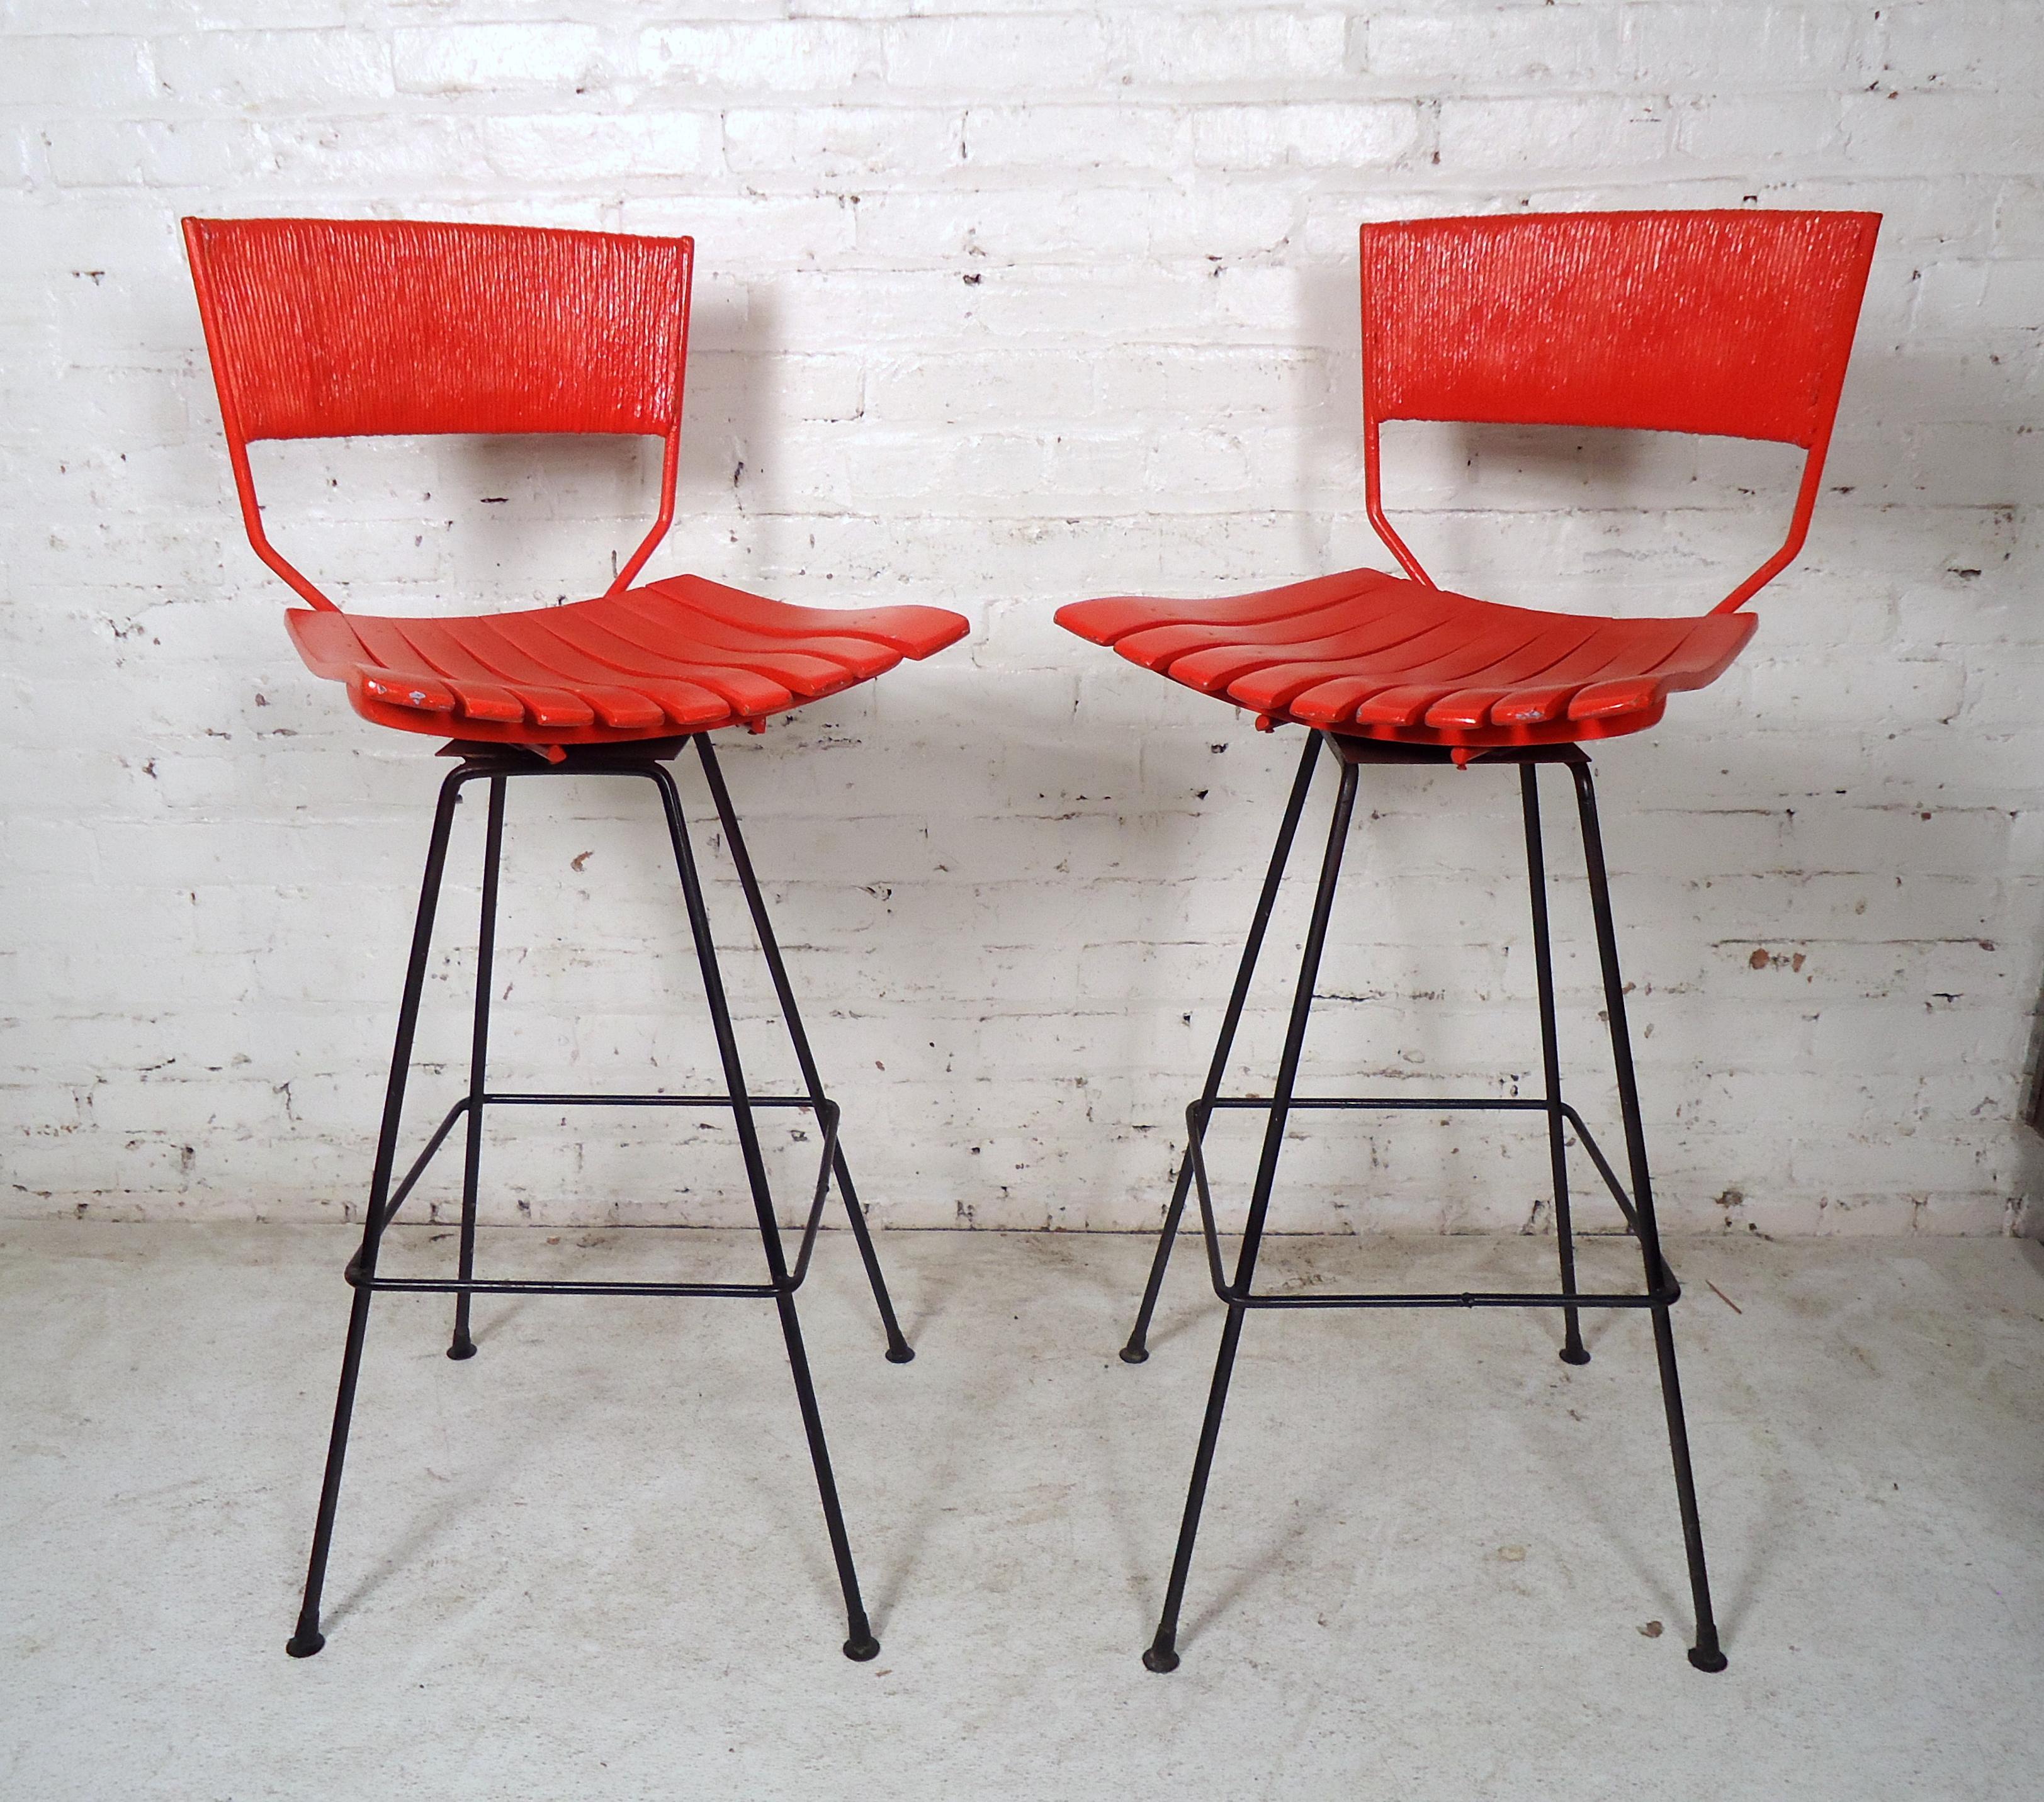 Pair of Arthur Umanoff style tall swivel bar stools these stools feature an iron base with bentwood slatted seats and a woven rush backrest painted red. The perfect addition to the midcentury environment.

Please confirm item location (NY or NJ)